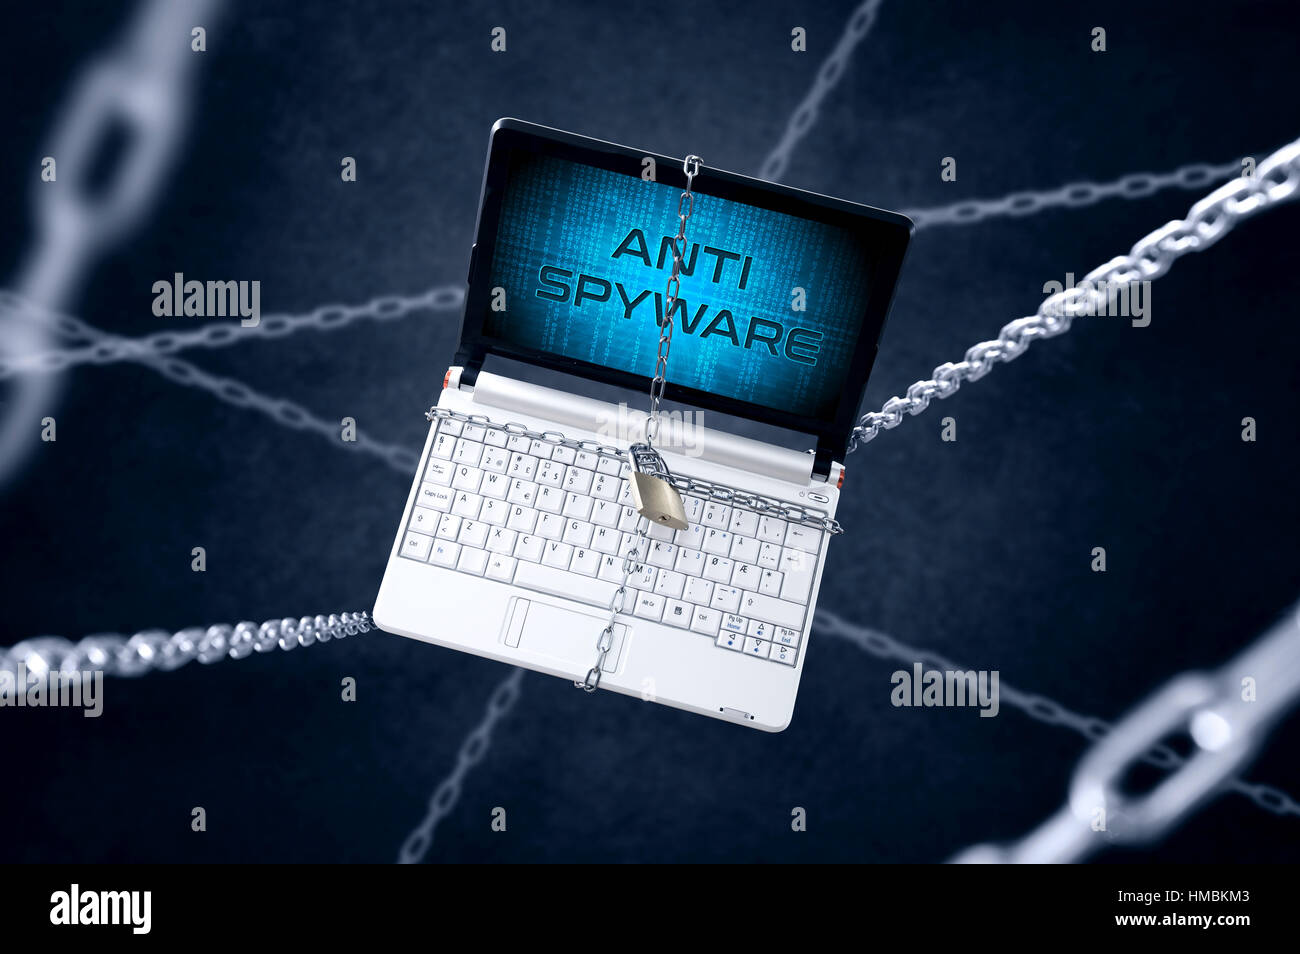 Chained laptop with "Anti Spyware" symbol. Conception of computer protection Stock Photo